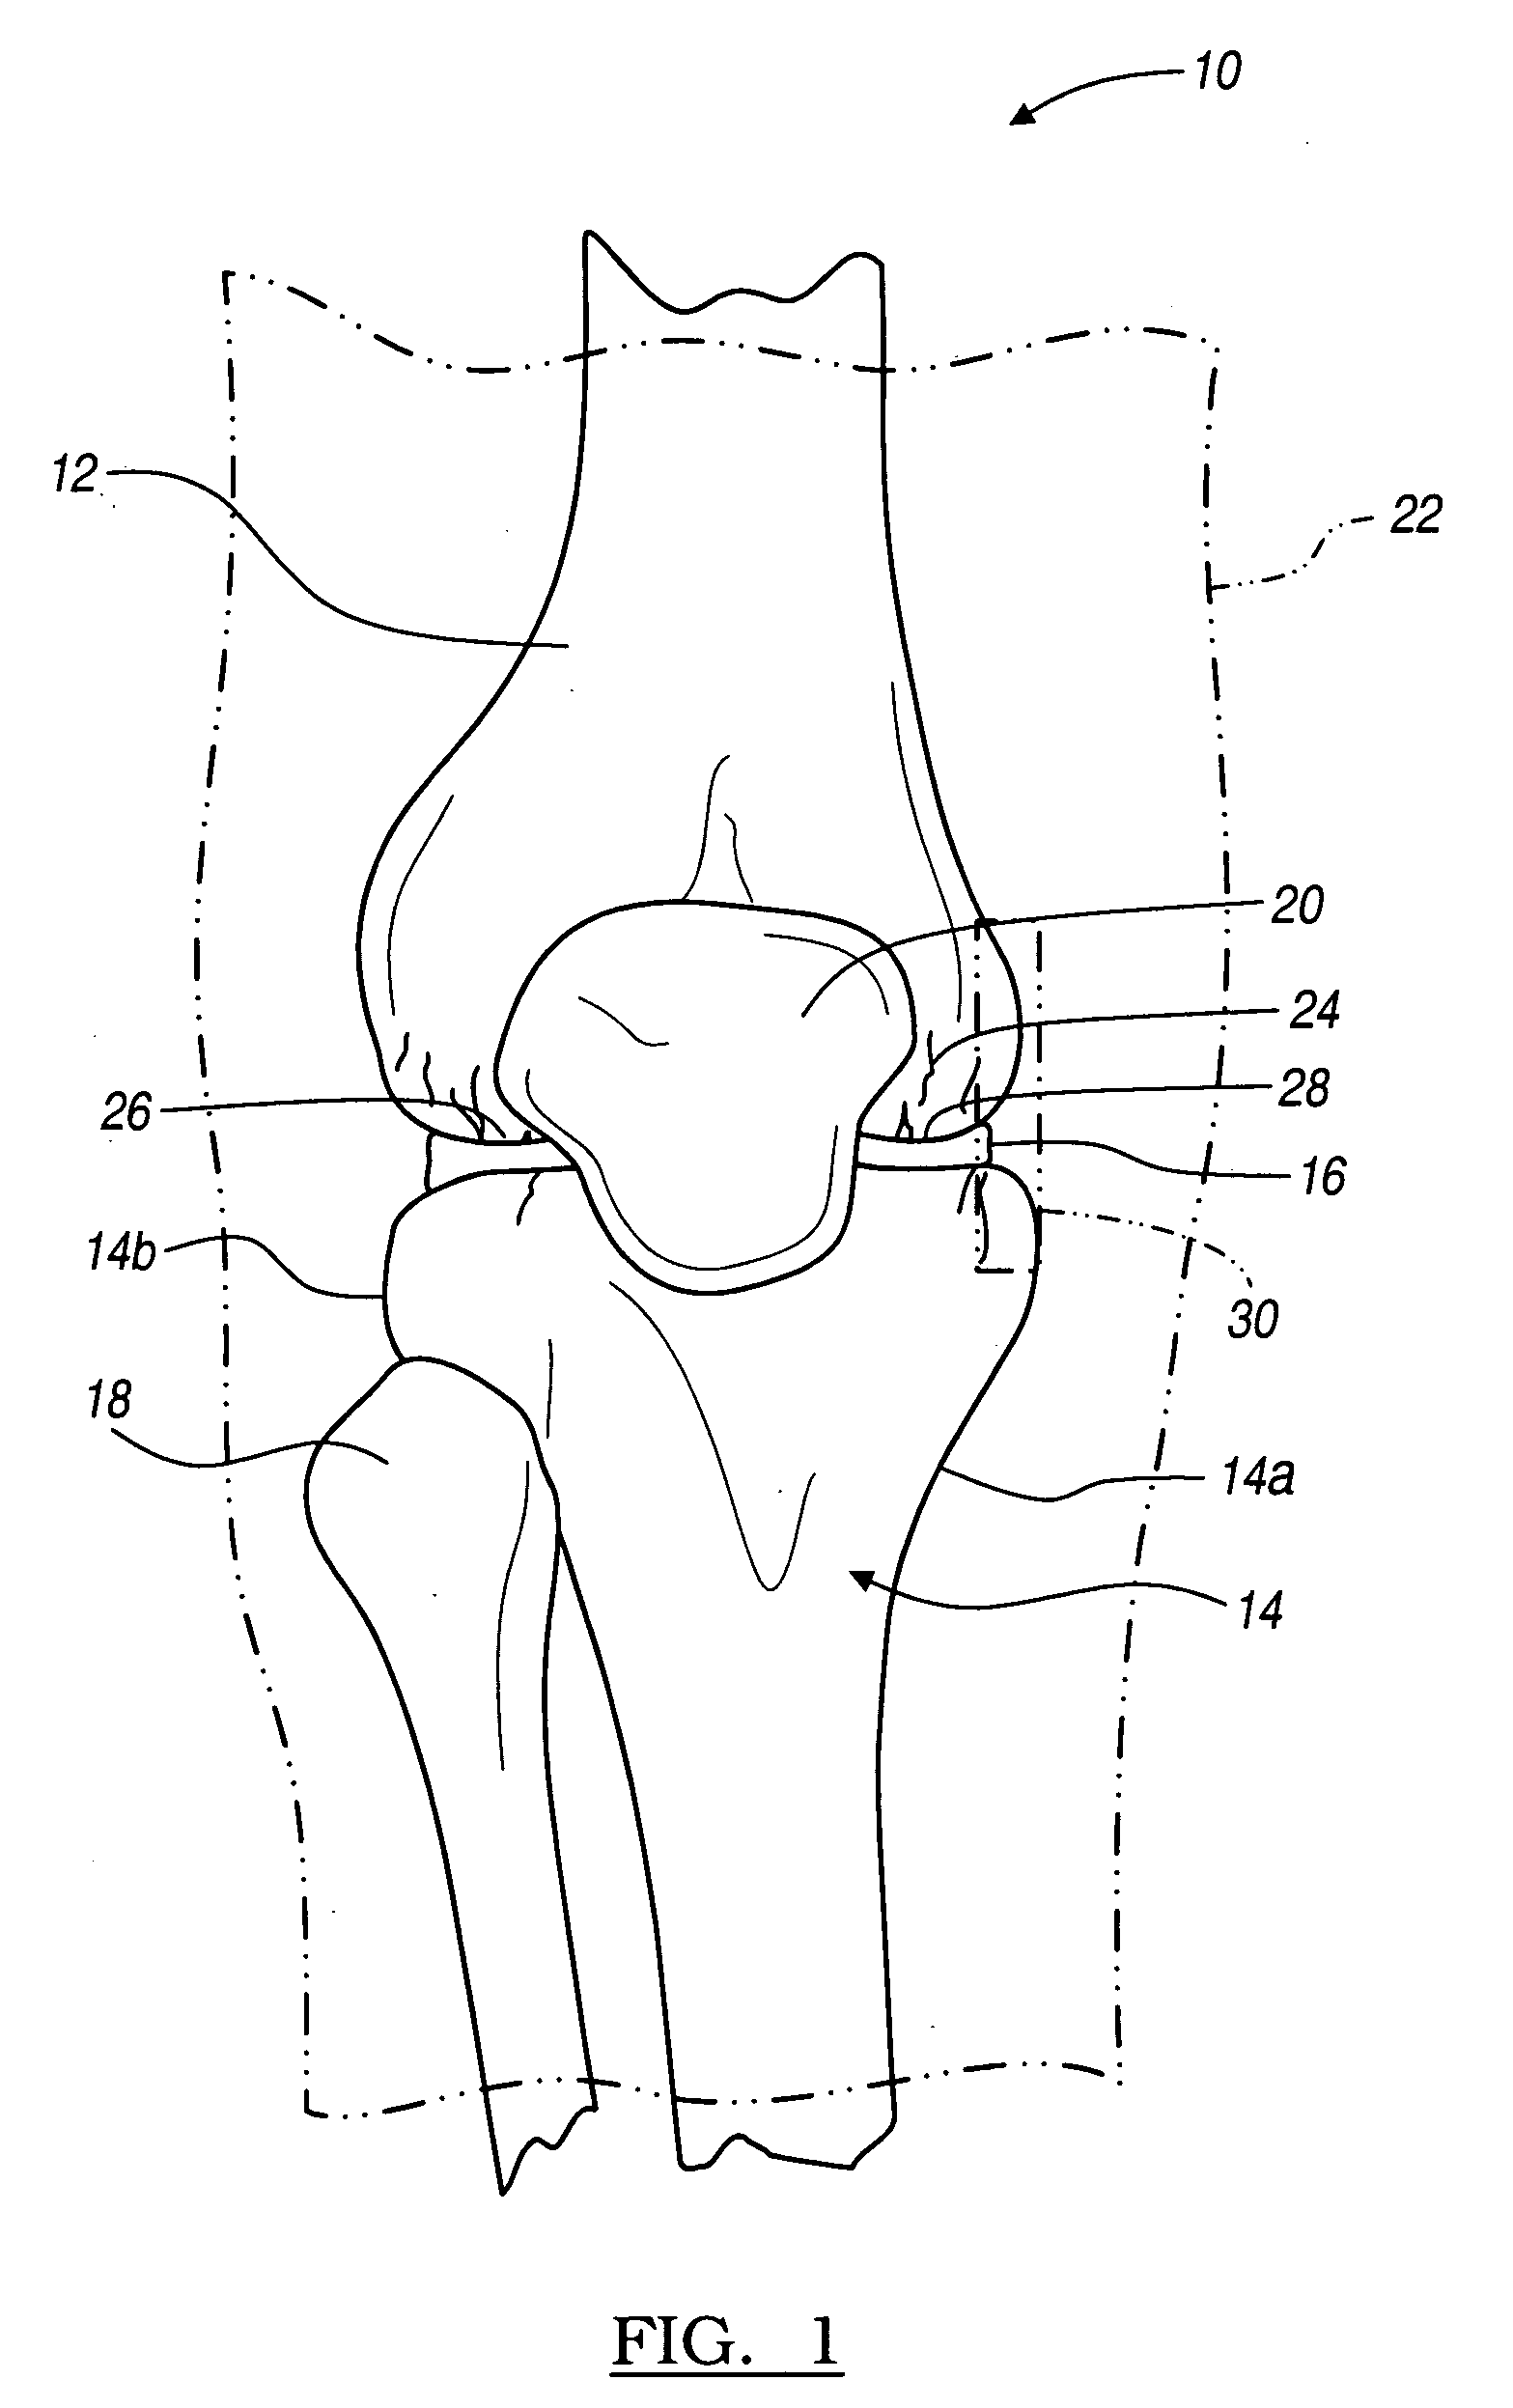 Instrumentation for knee resection